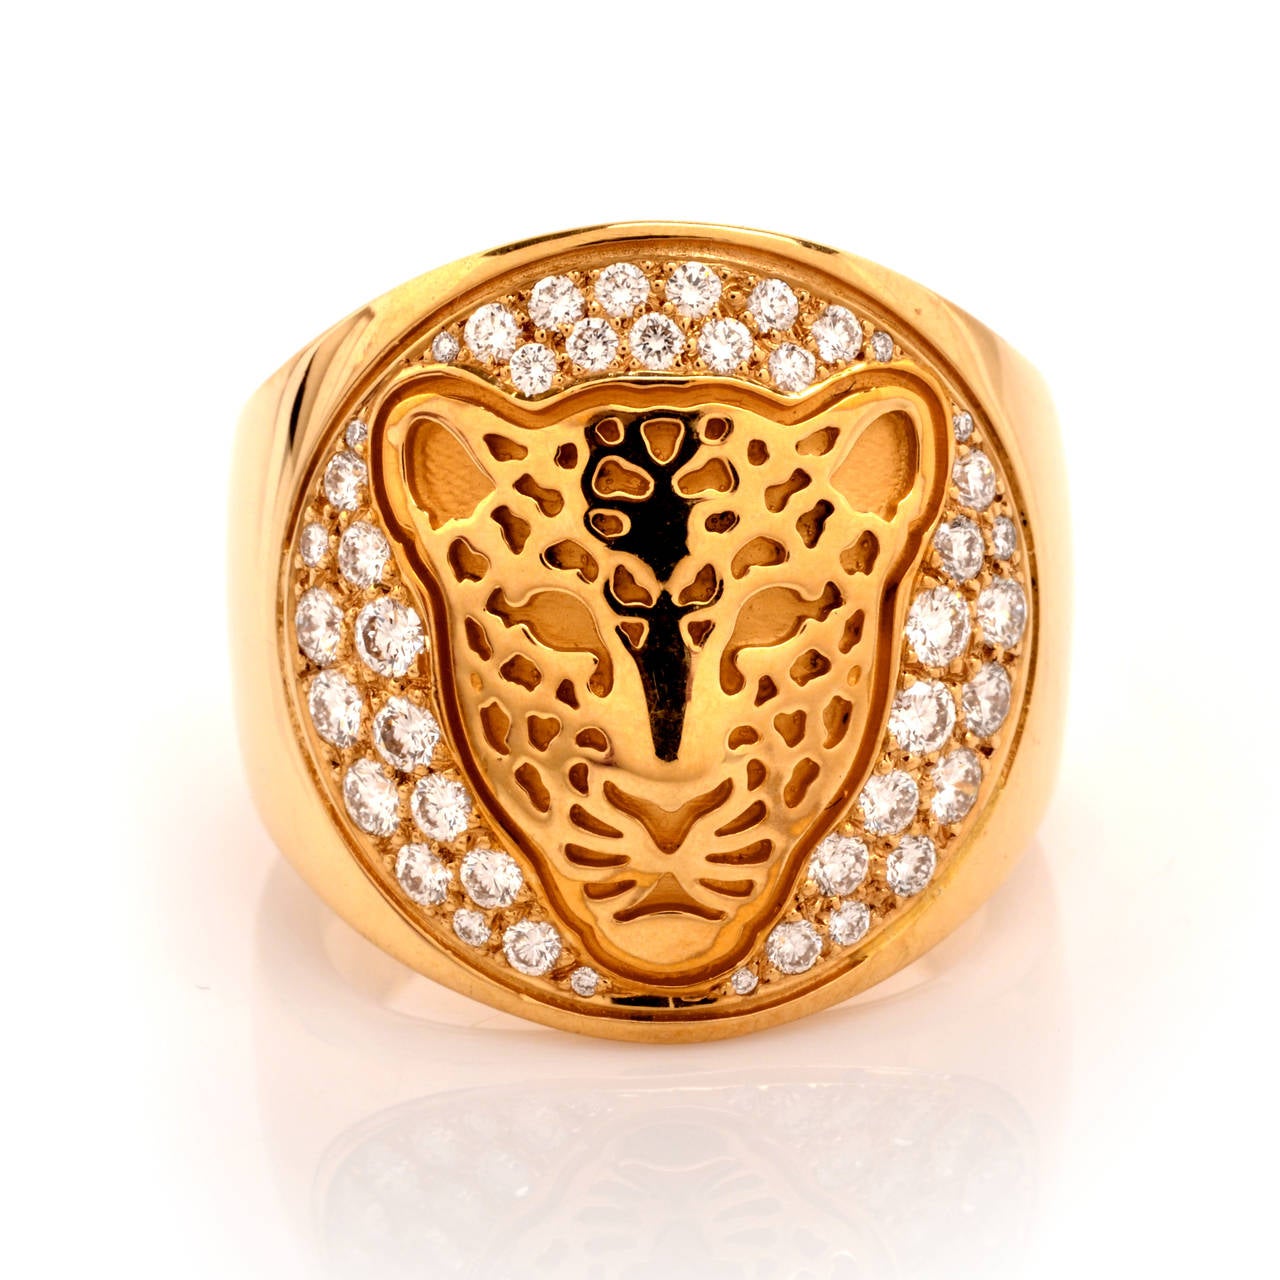 This stunning, 100% Original Carrera Carrera Fiera Leopard Ring is crafted beautifully in solid 18K yellow gold. This ring exposes a leopard head in a polished and matte gold finish, adorned by some 43 genuine round cut diamonds approx 2.00cttw, F-G